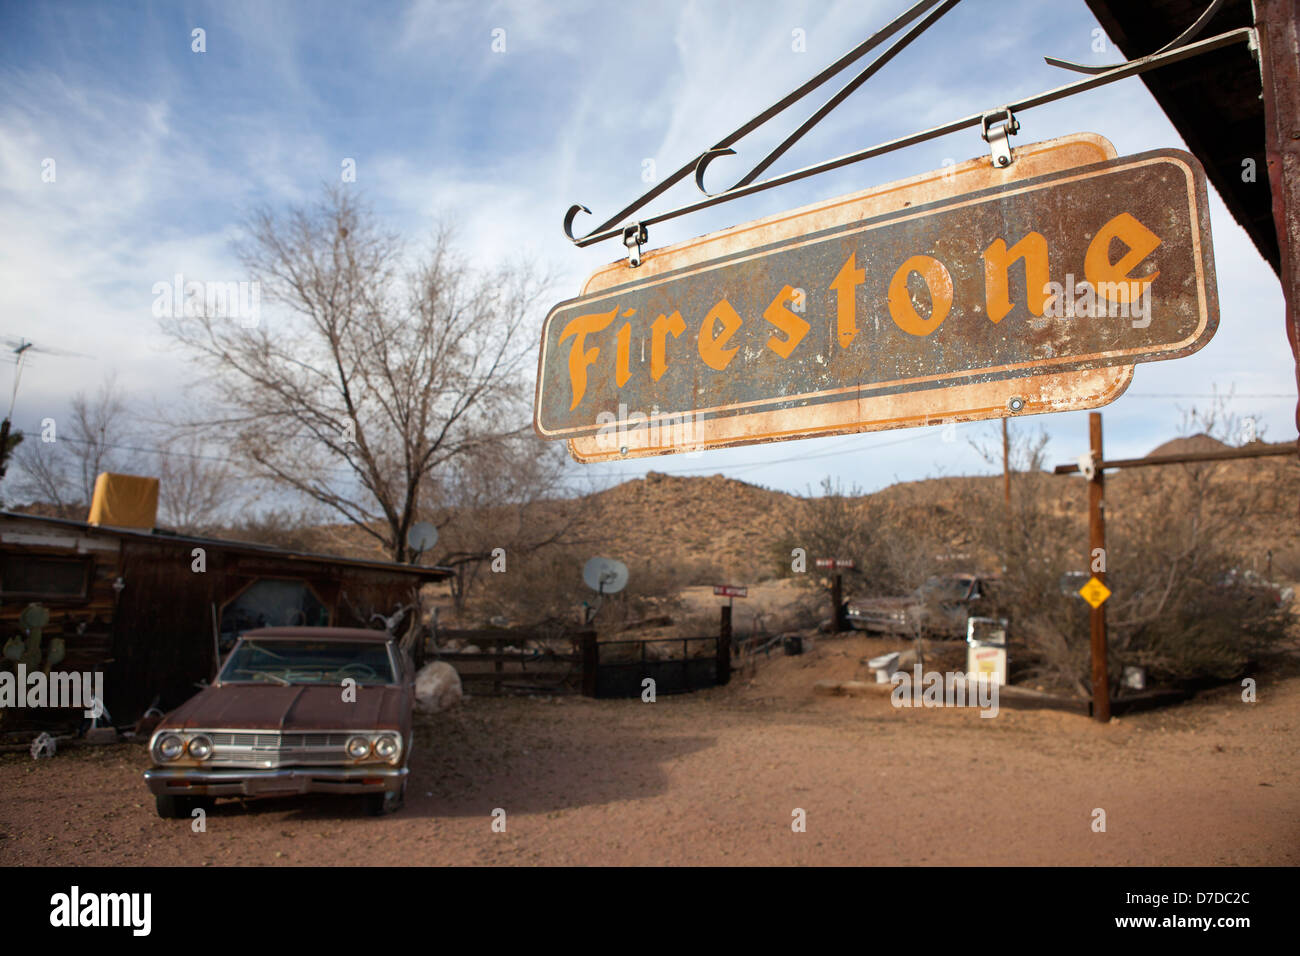 A Firestone sign and an old car at route 66 in Hackberry, Arizona, USA Stock Photo